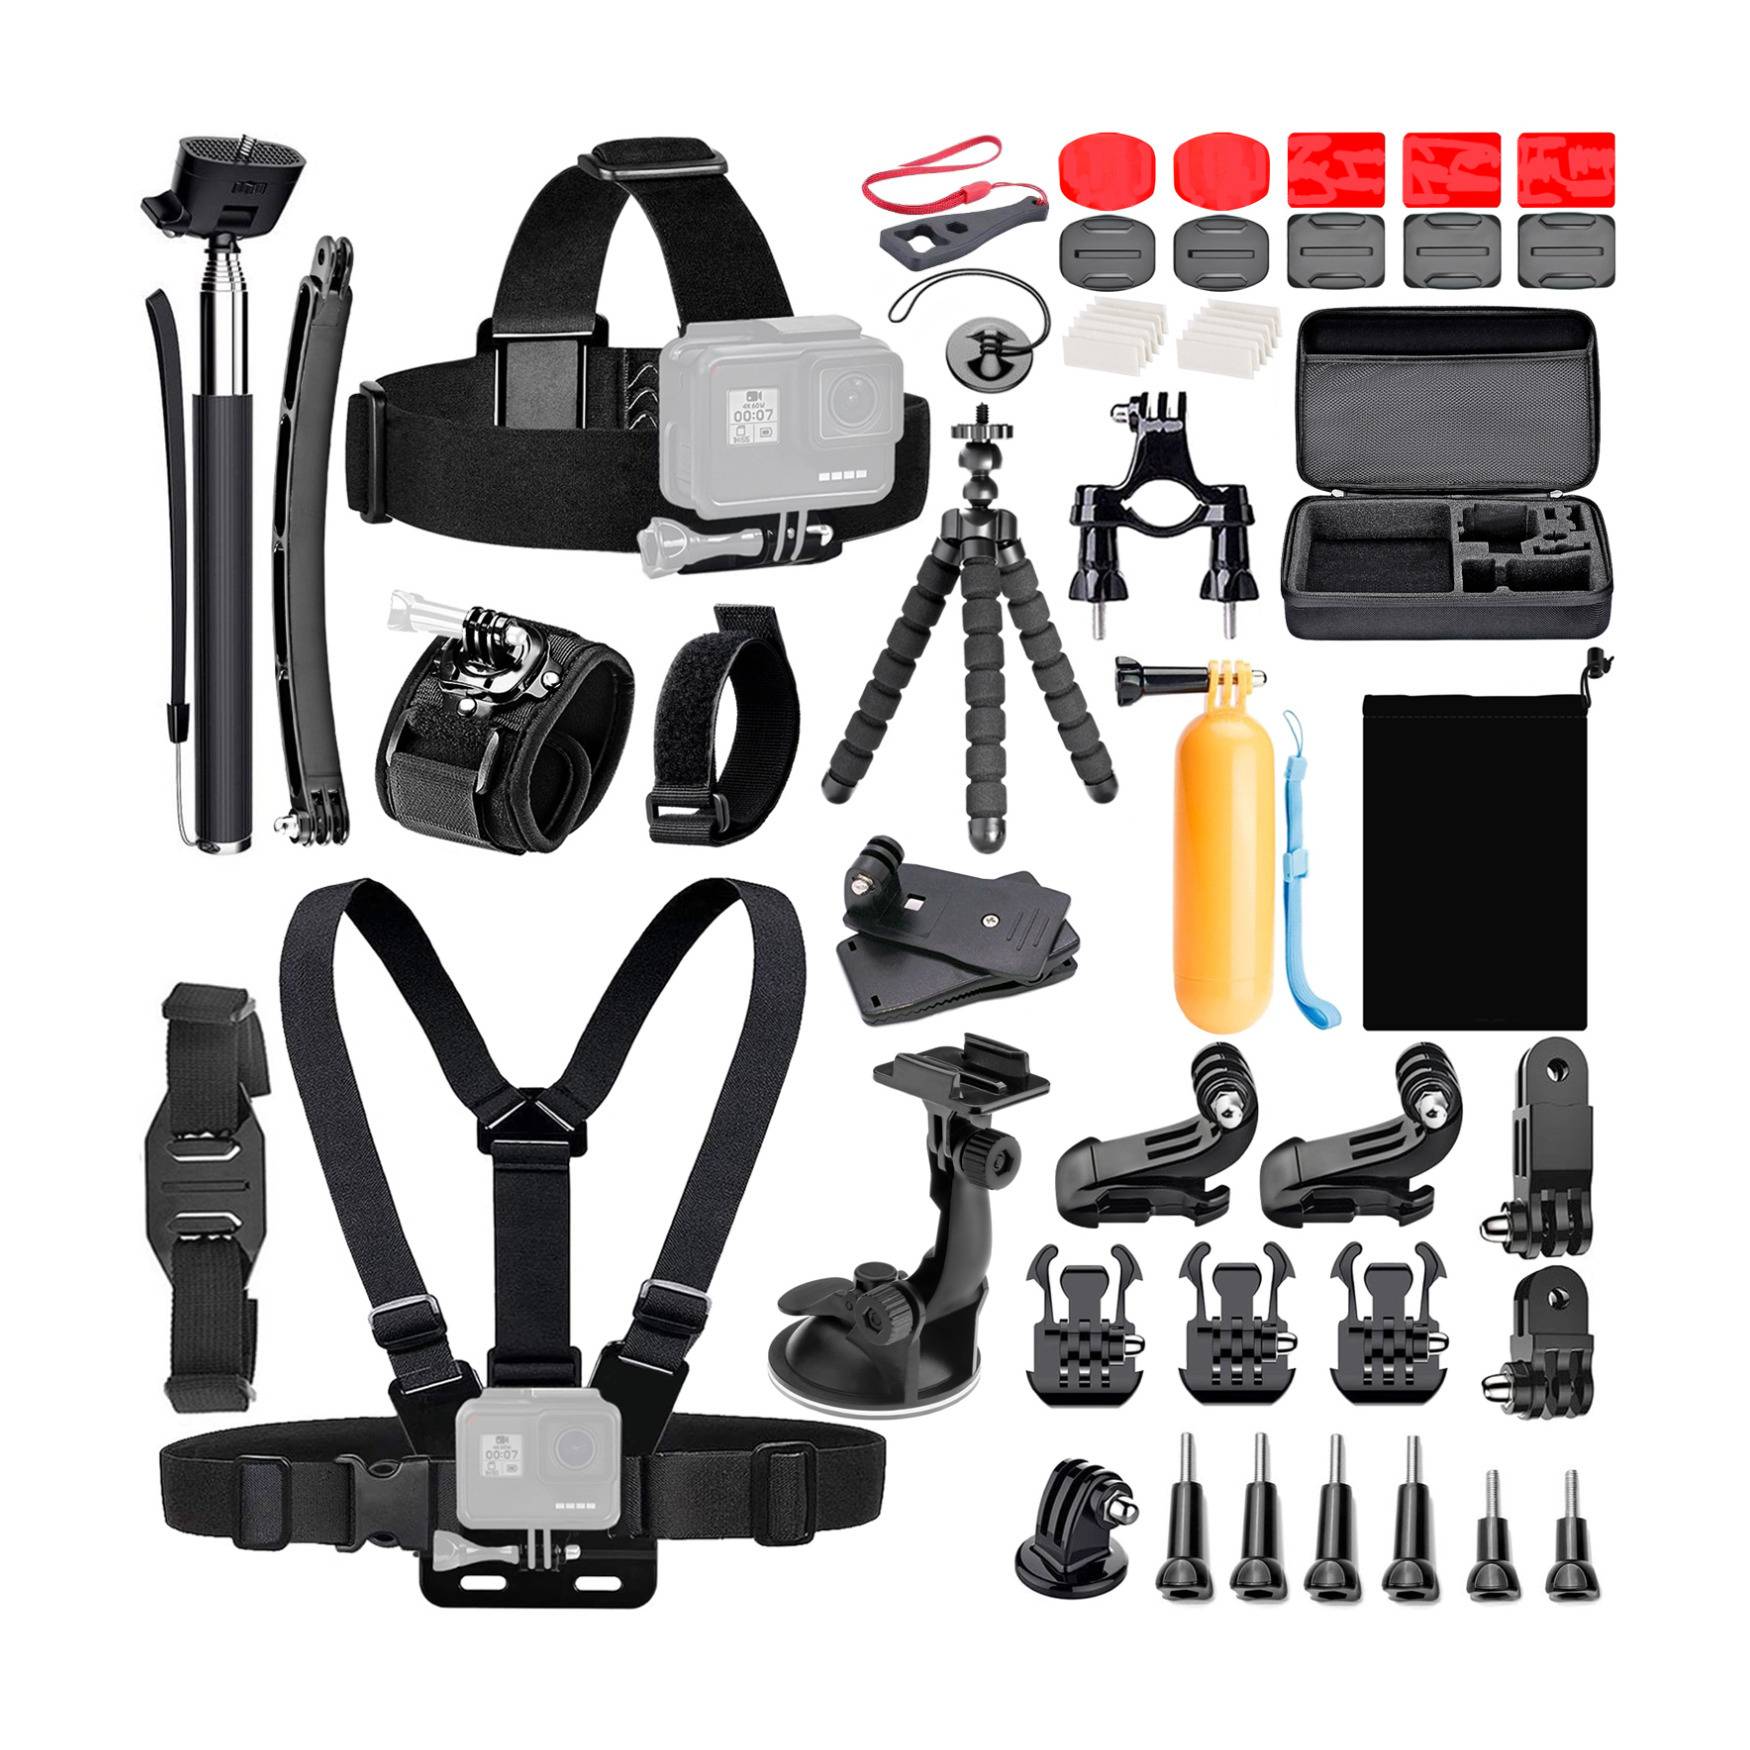 Koah 50-In-1 Action Camera Accessory Kit (Compatible with GoPro)